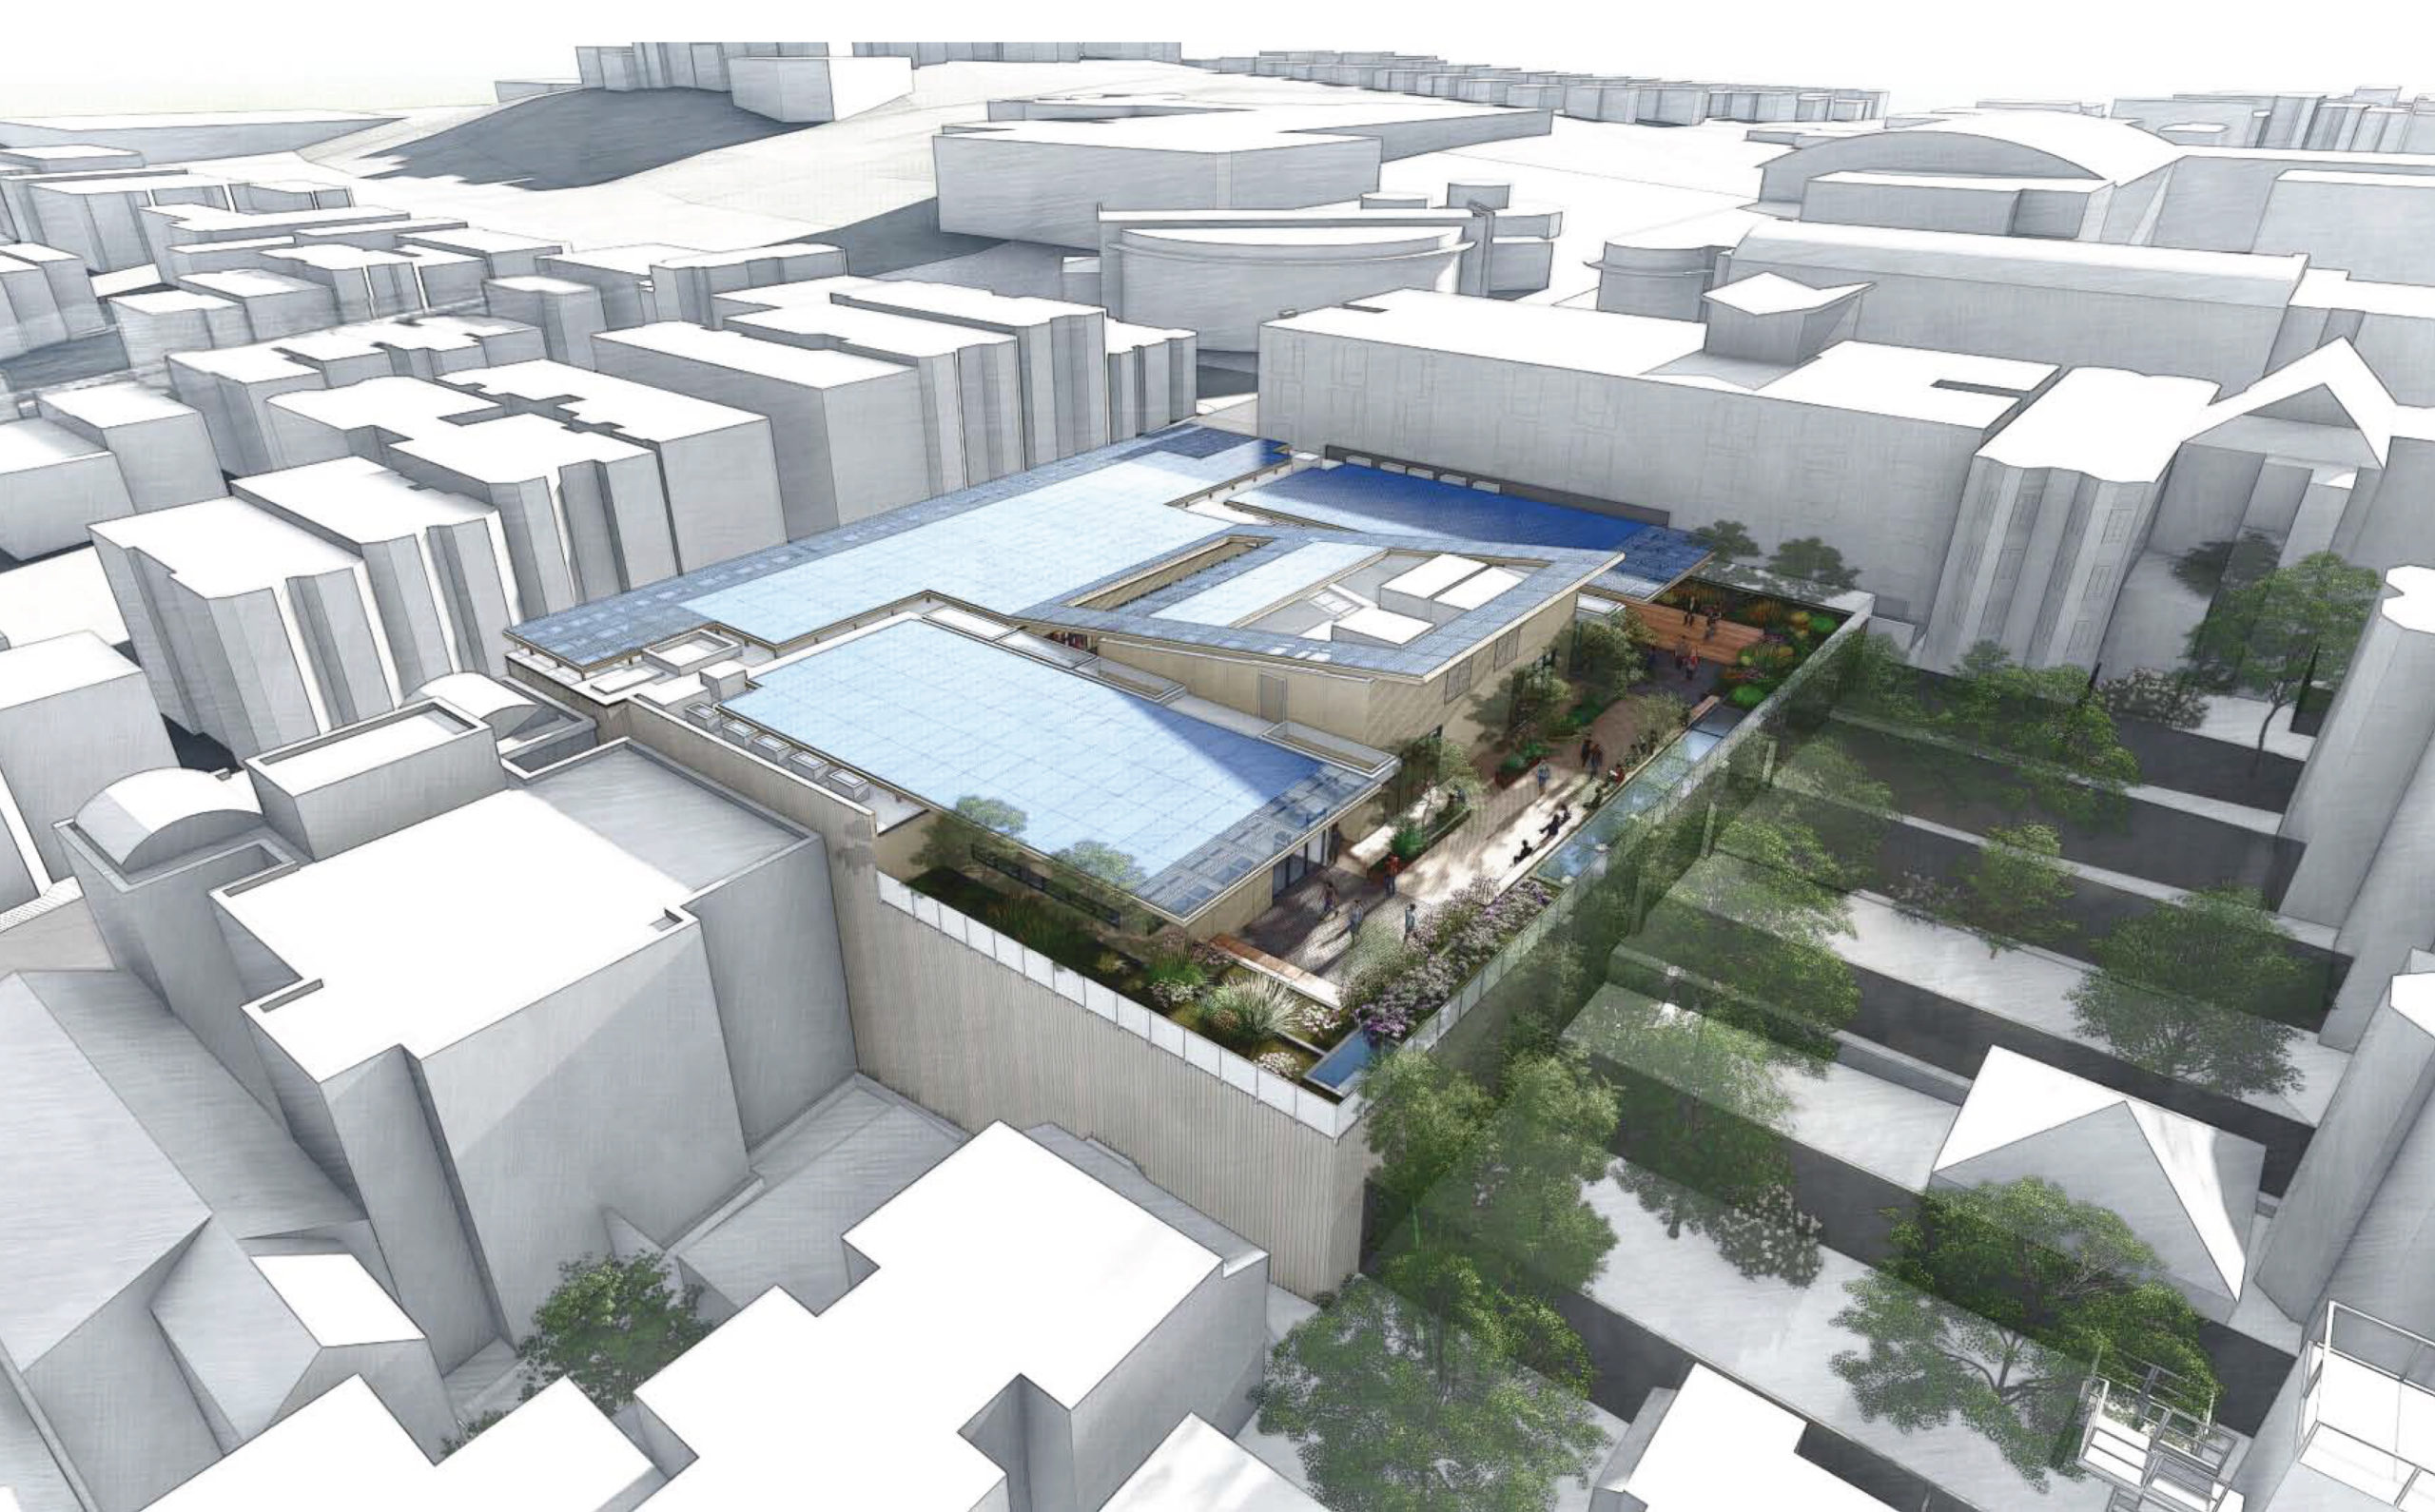 University High School at 3150 California Street aerial perspective, rendering by Leddy Maytum Stacy Architects